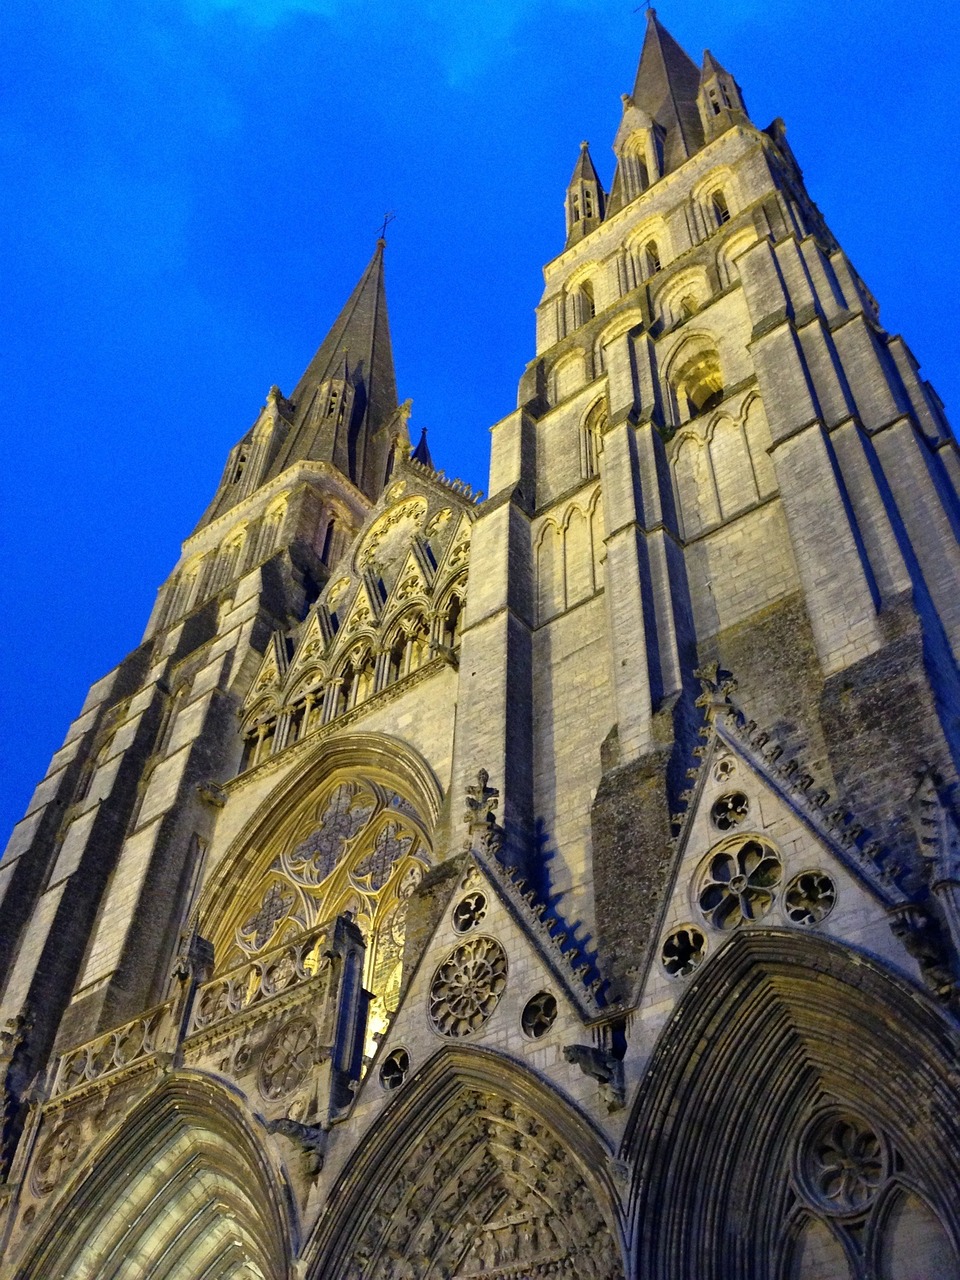 4-Day Adventure in Bayeux and Normandy